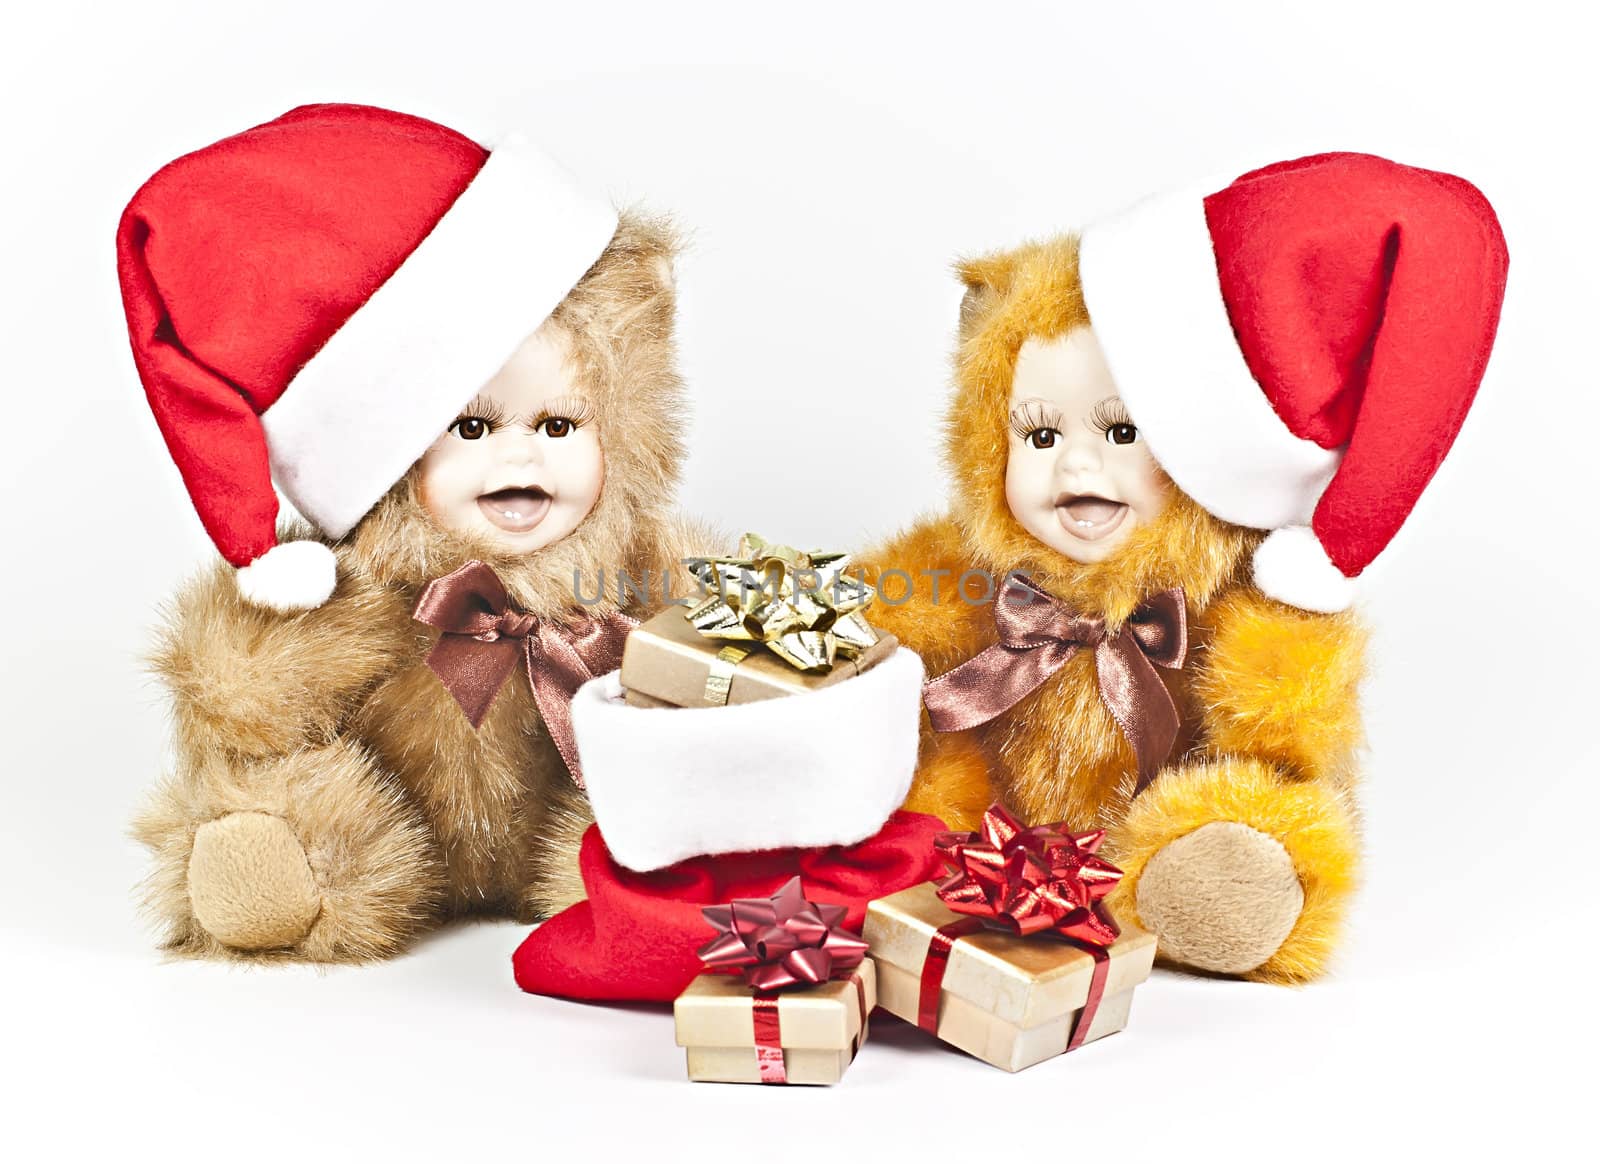 On a white background are two porcelain bears a Christmas gift bag.
